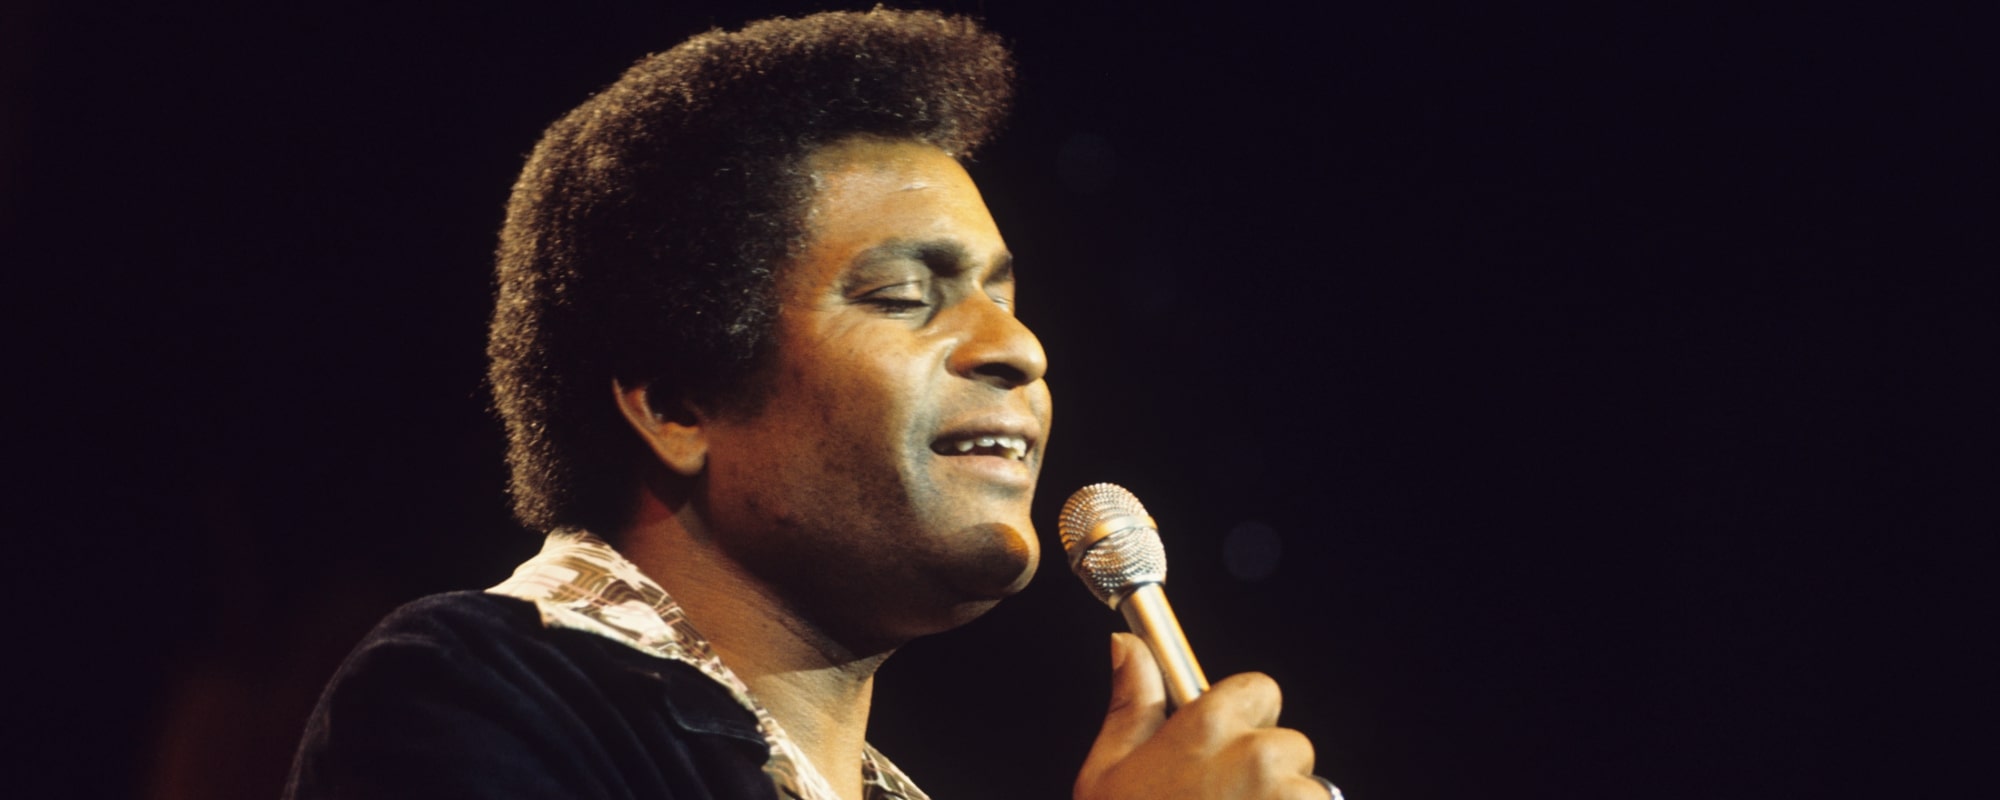 Charley Pride’s 1971 Classic “Kiss an Angel Good Mornin'” Inducted into the Grammy Hall of Fame